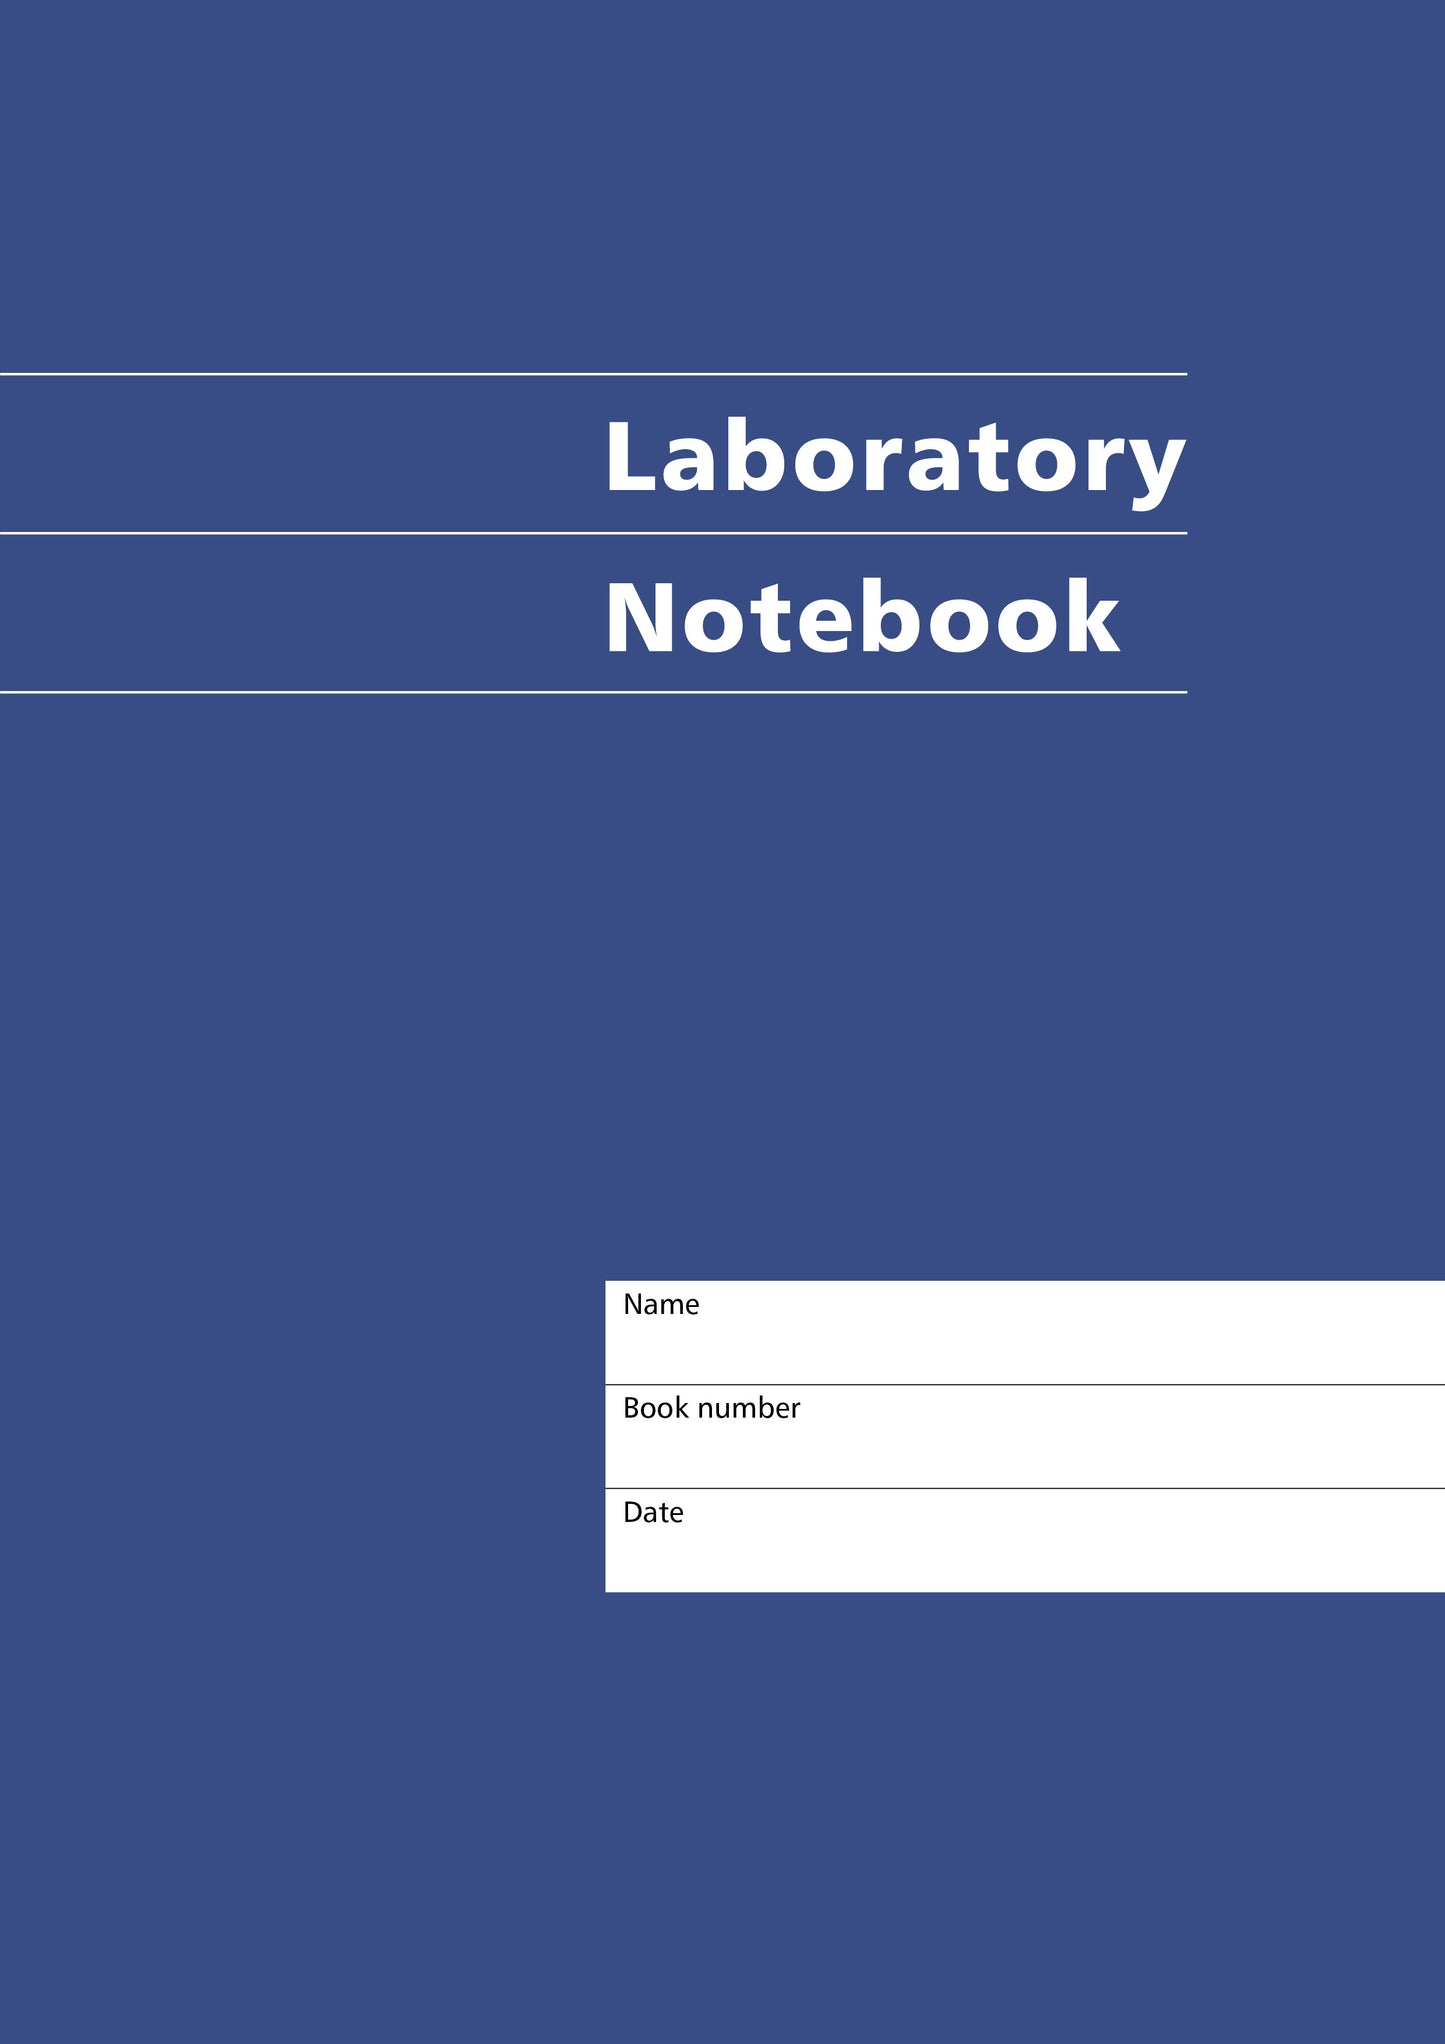 Code A01: A4 laboratory notebook - hard cover, 200 pages, 8mm ruled line spacing with left-hand margin